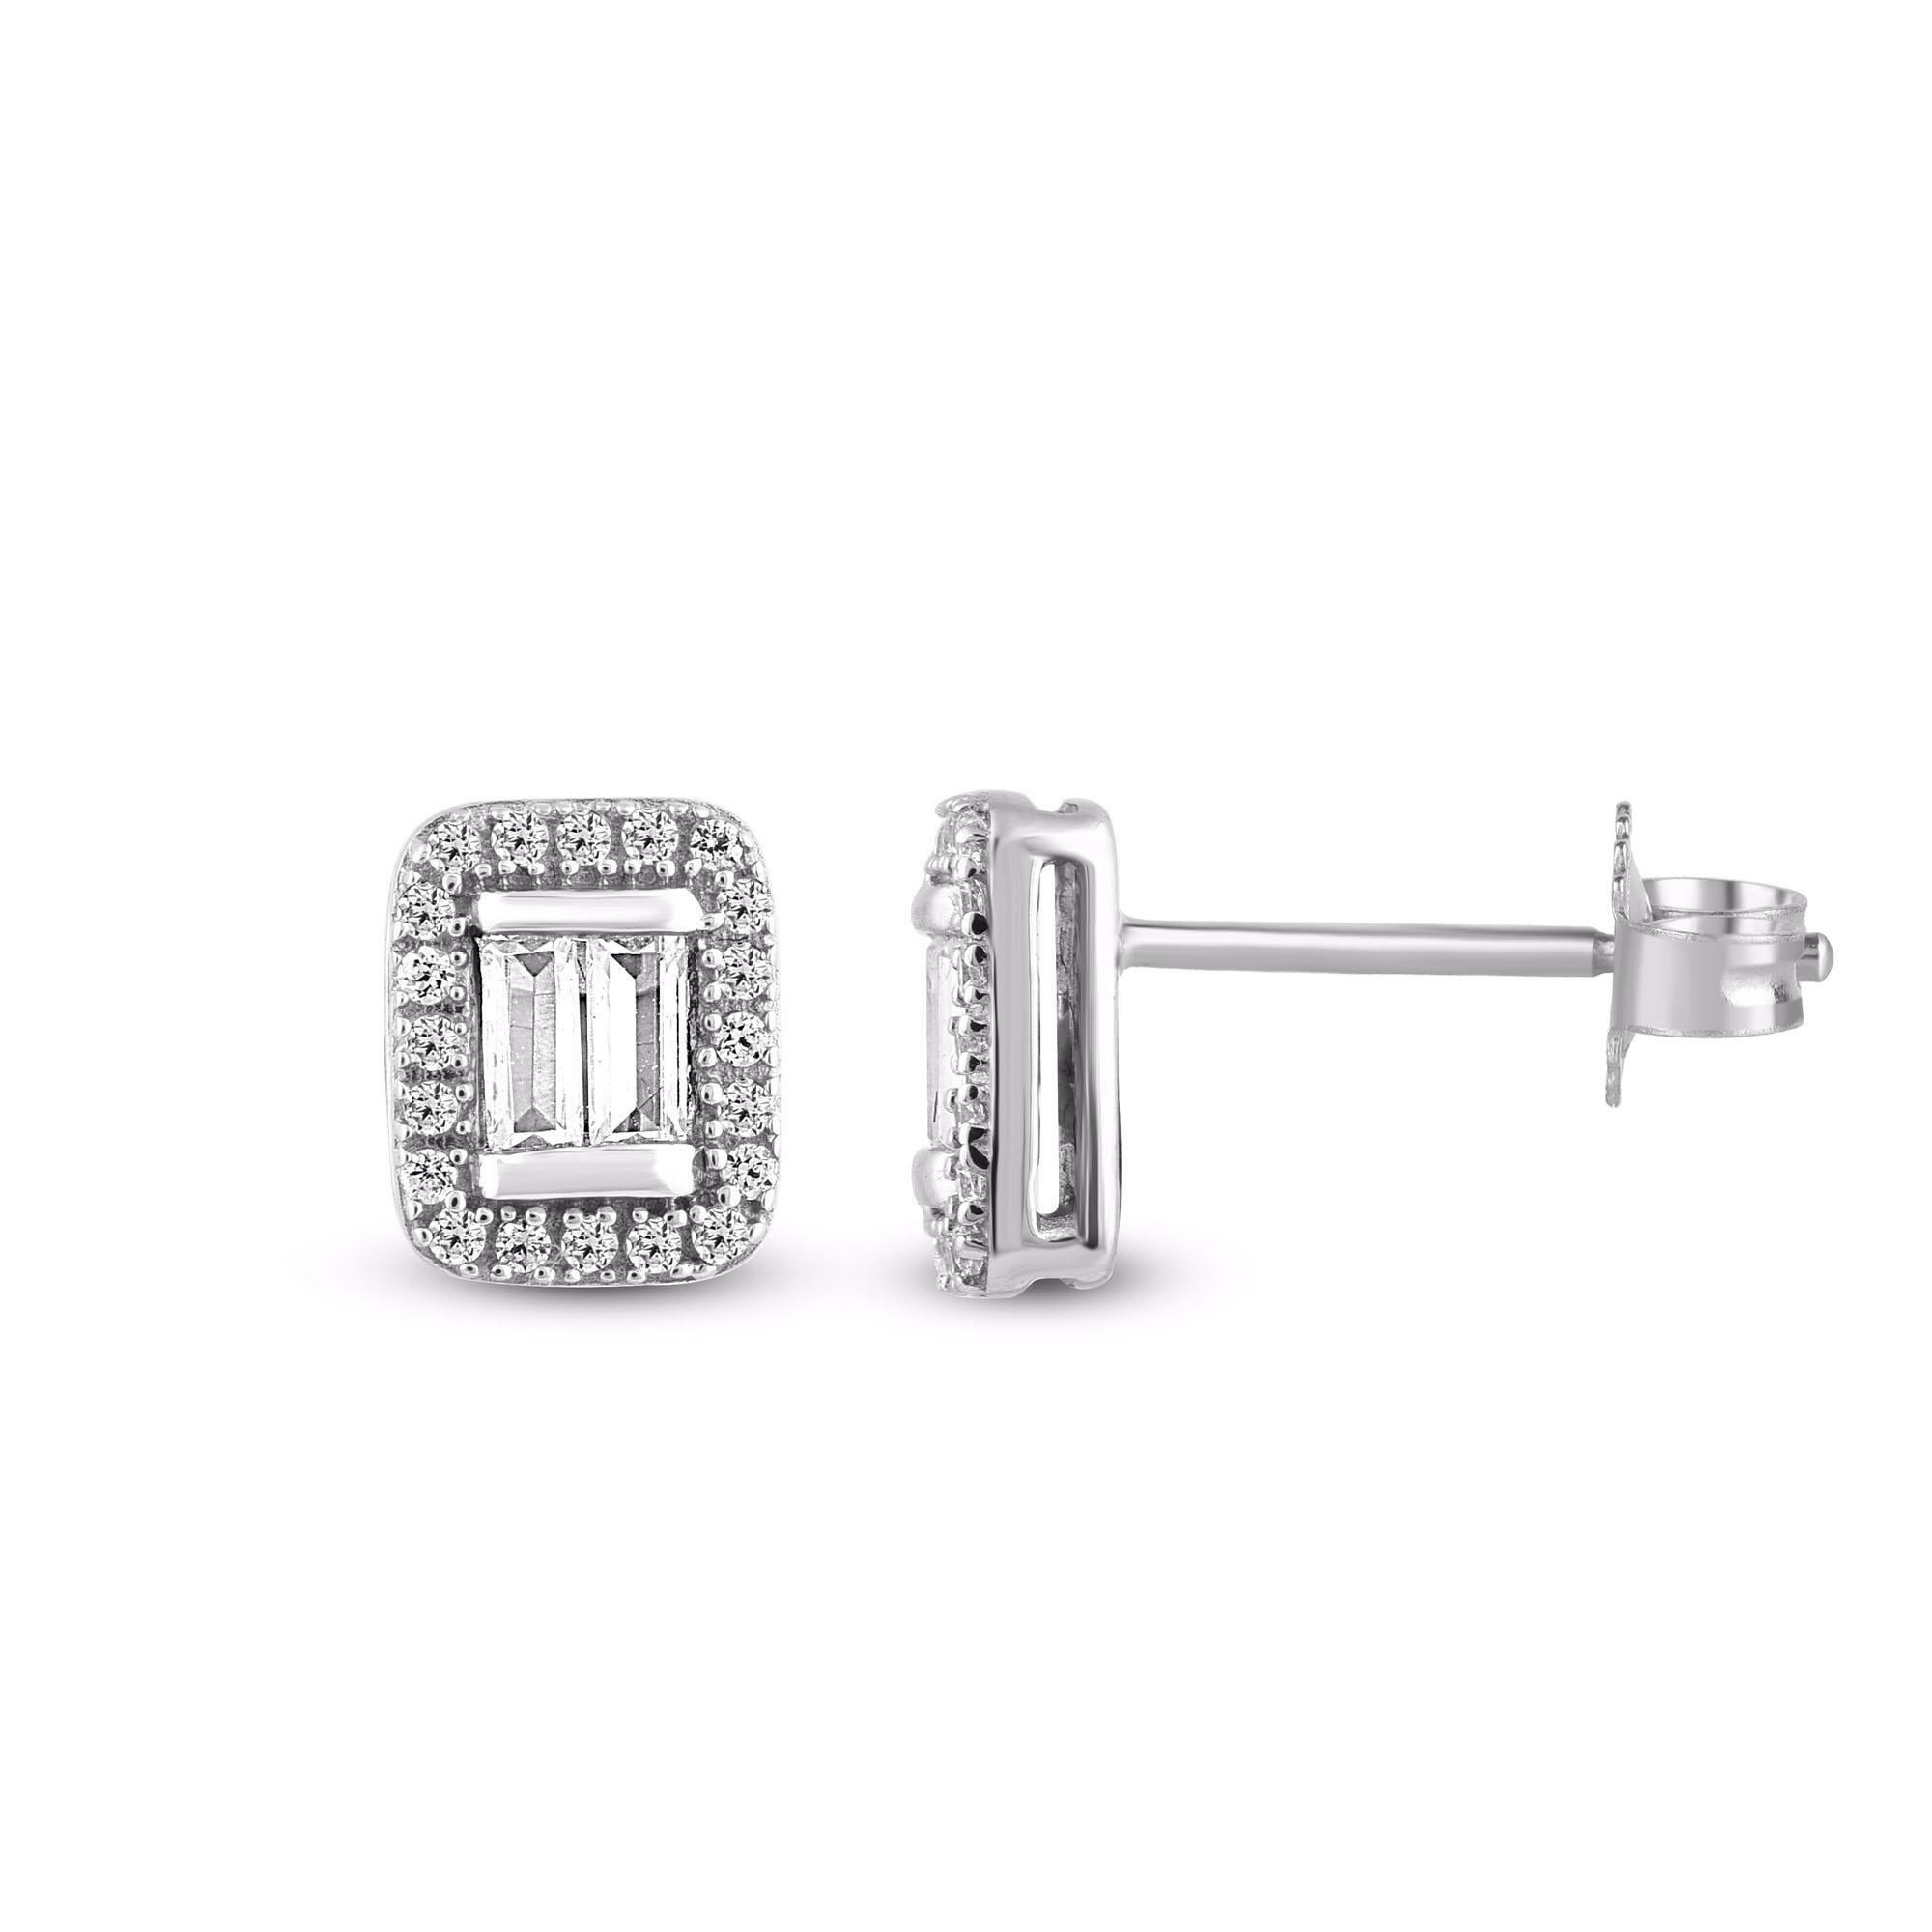 Timeless and elegant, these diamond stud earring are a style you'll wear with every look in your wardrobe. This earring is beautifully designed and studded with 46 natural single cut and baguette cut diamonds set in prong and channel setting. We